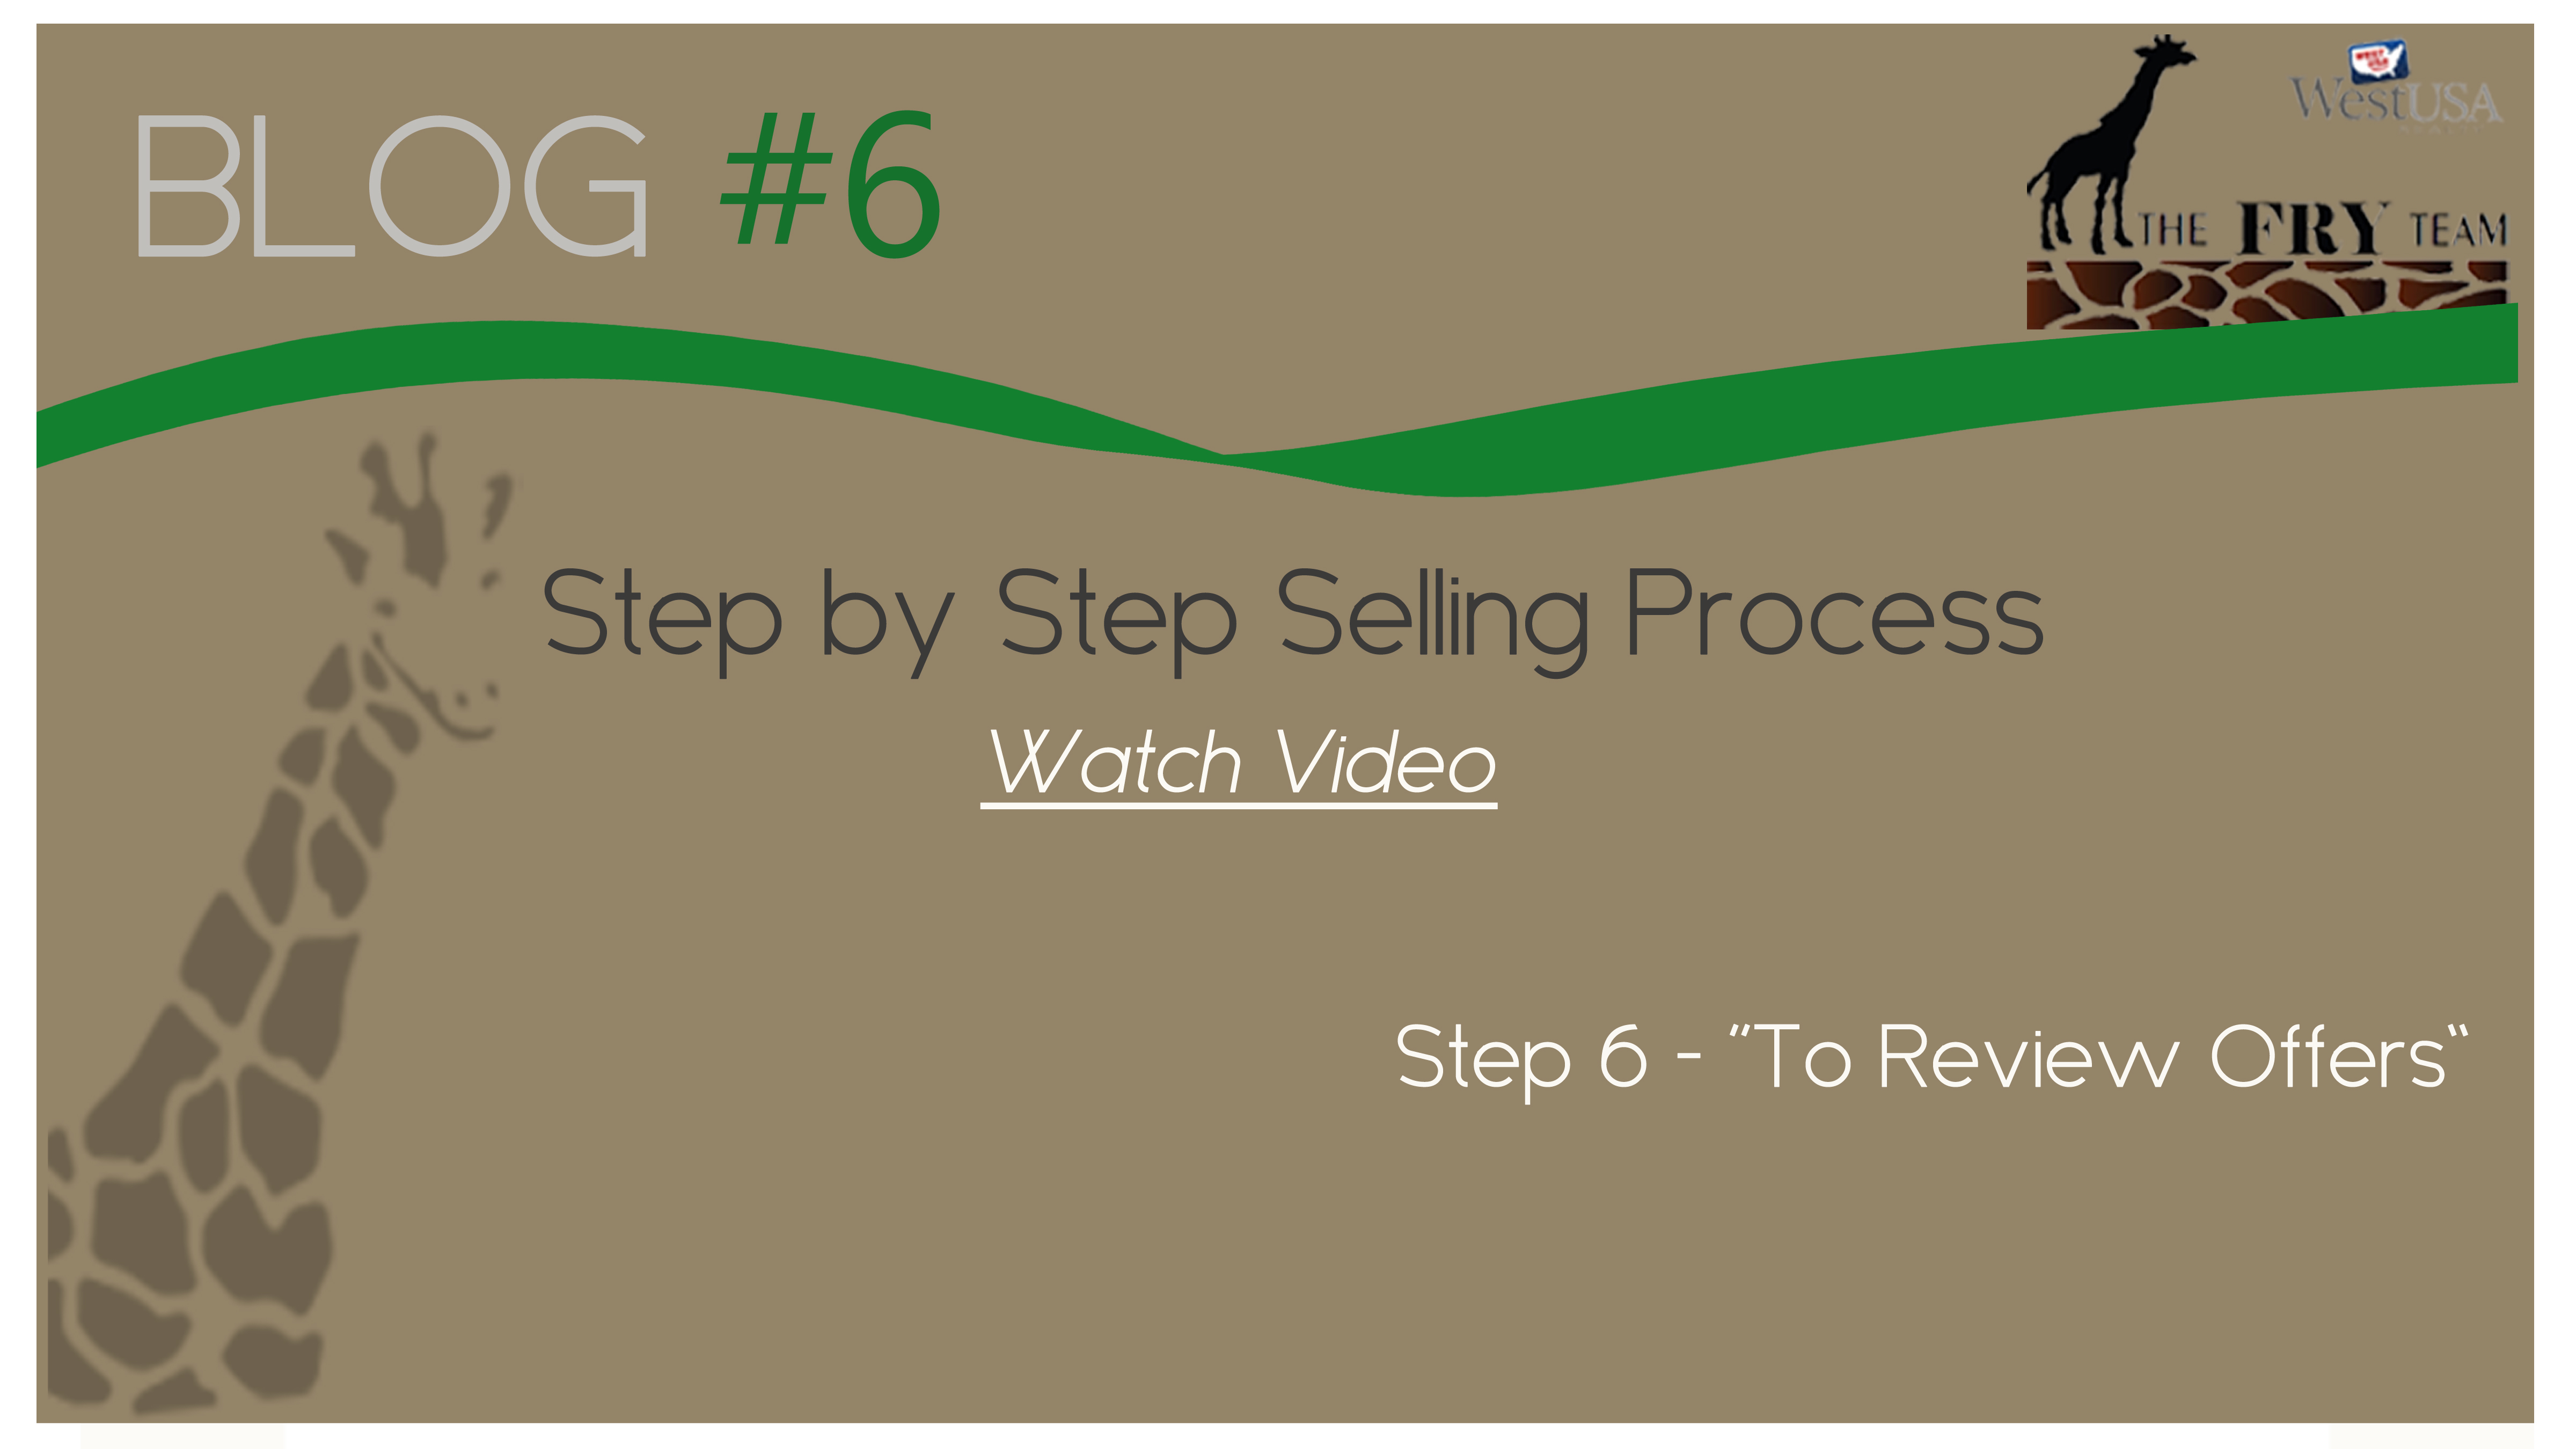 Step 6 – To Review Offers